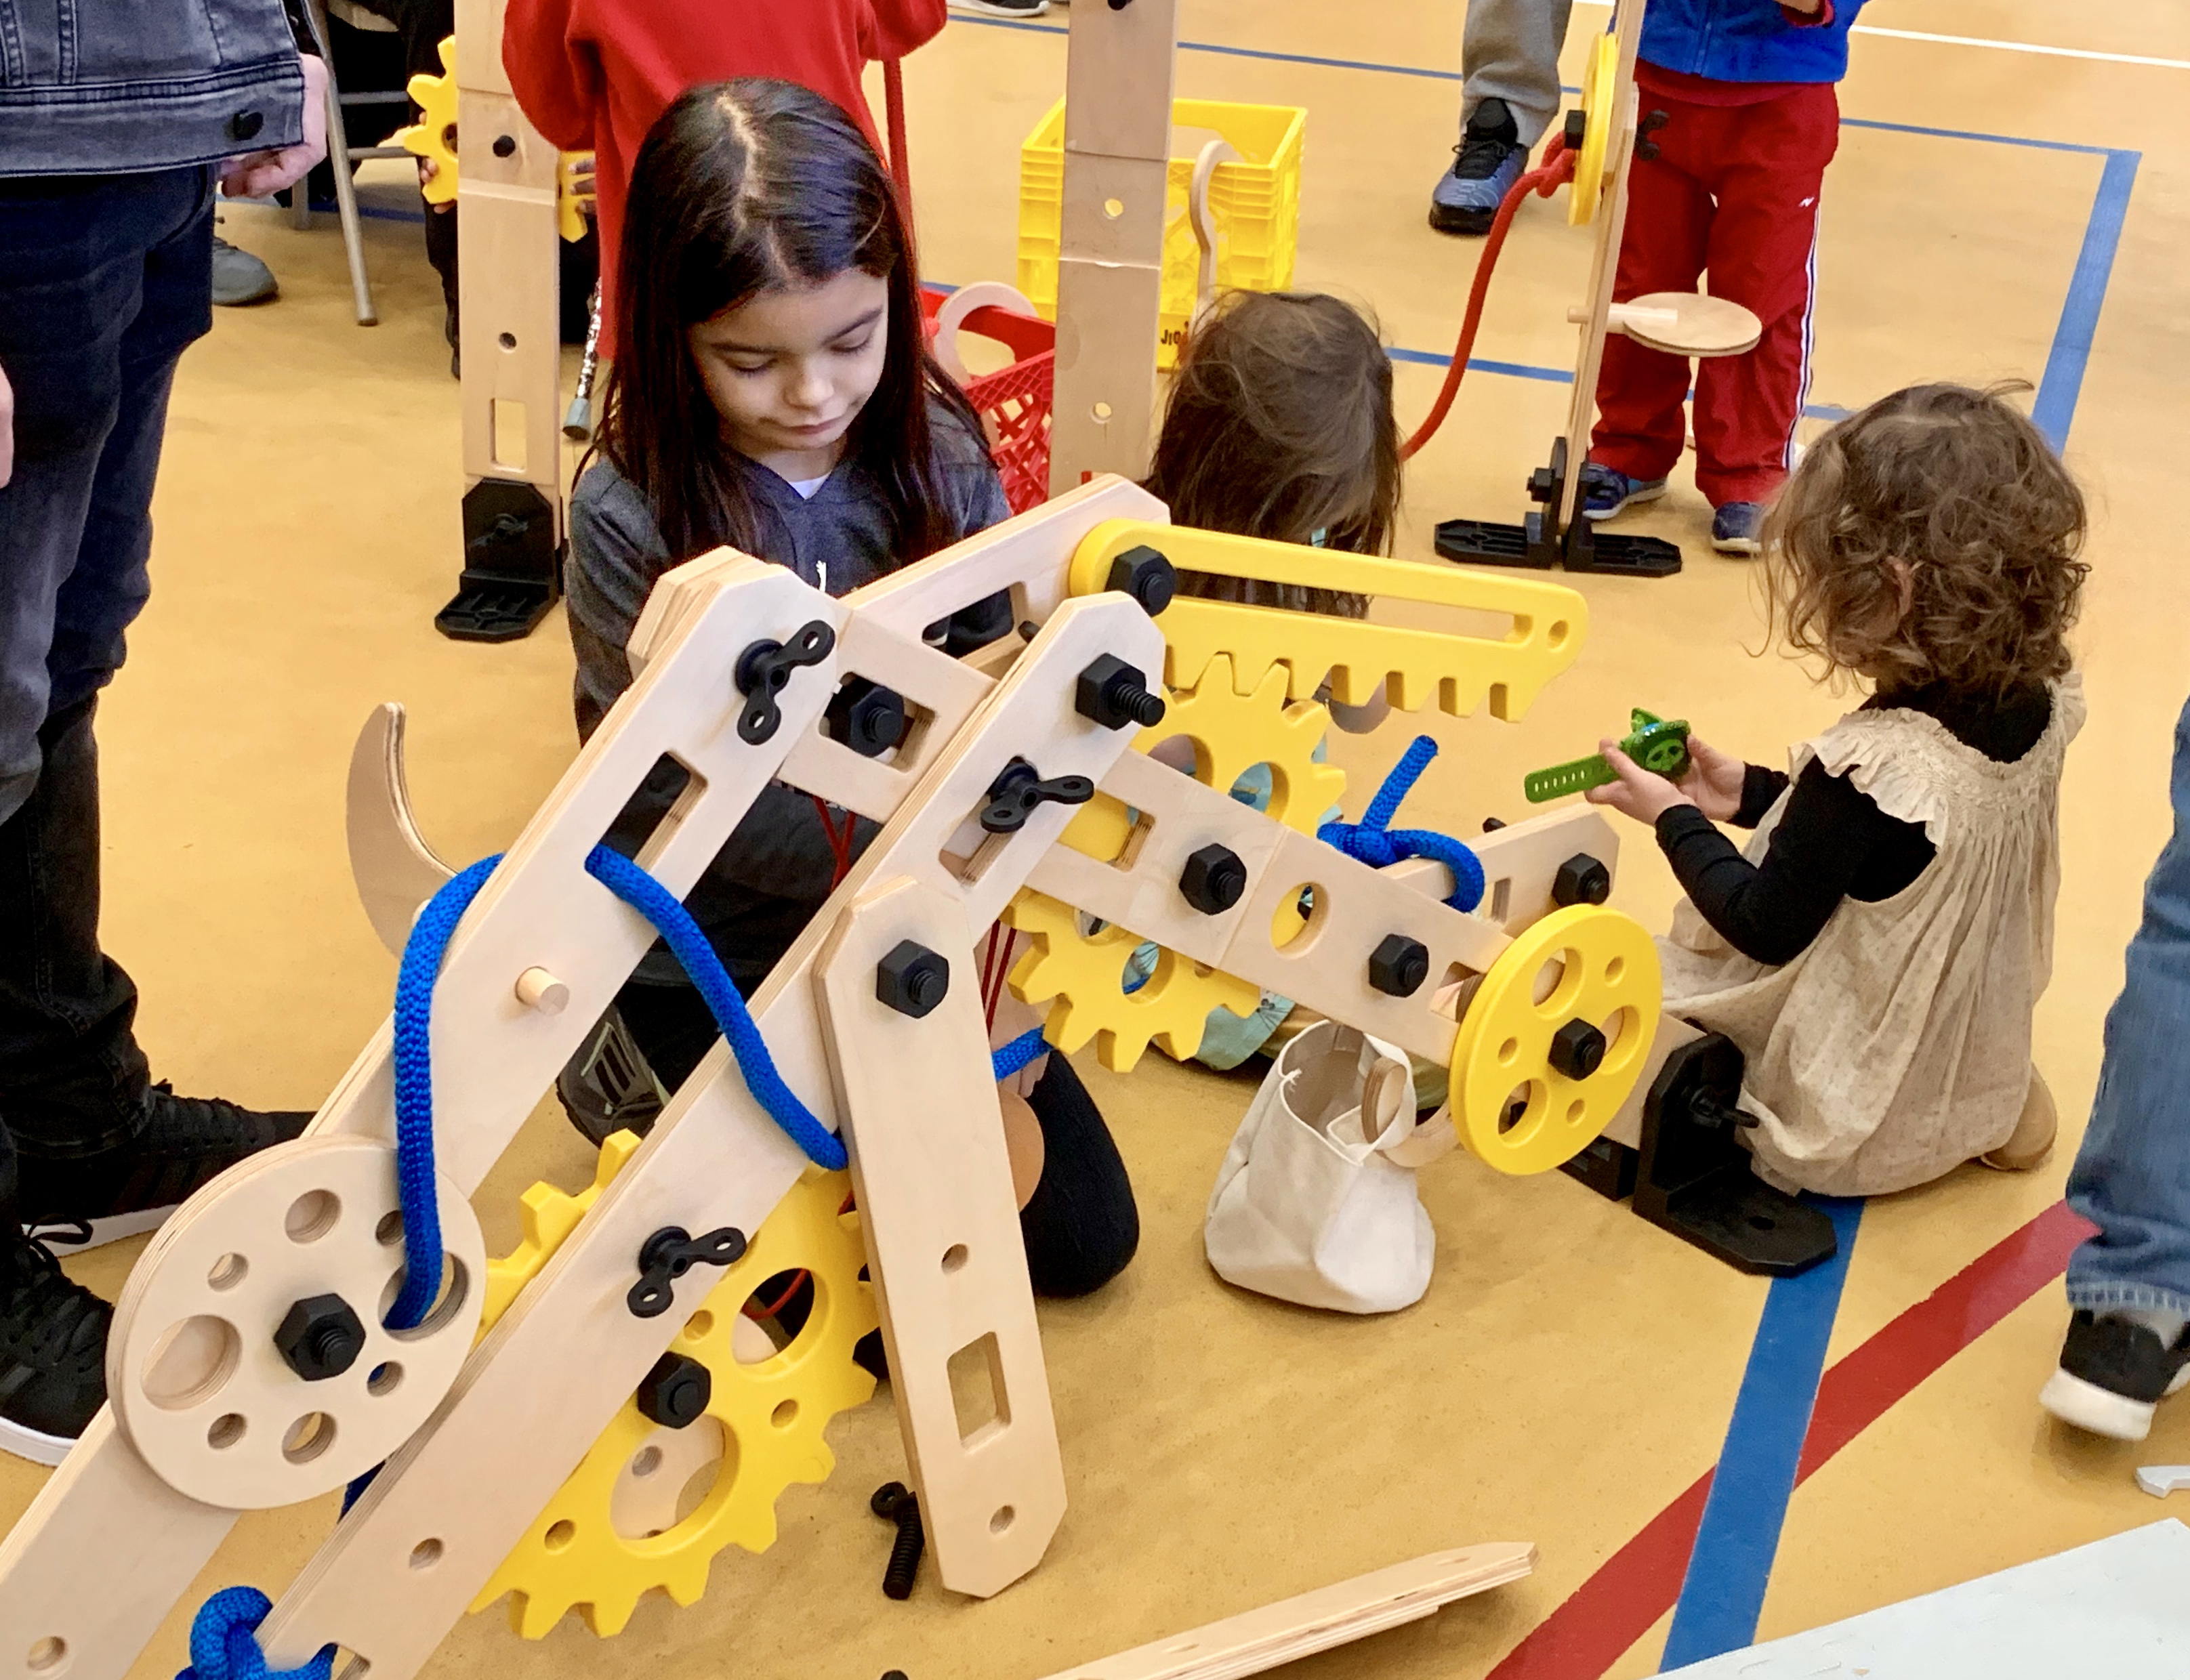 Kids learned mechanical principals working with oversized gears, pulleys and other machines courtesy of The GIANT Room. Photo: Mary Frost/Brooklyn Eagle